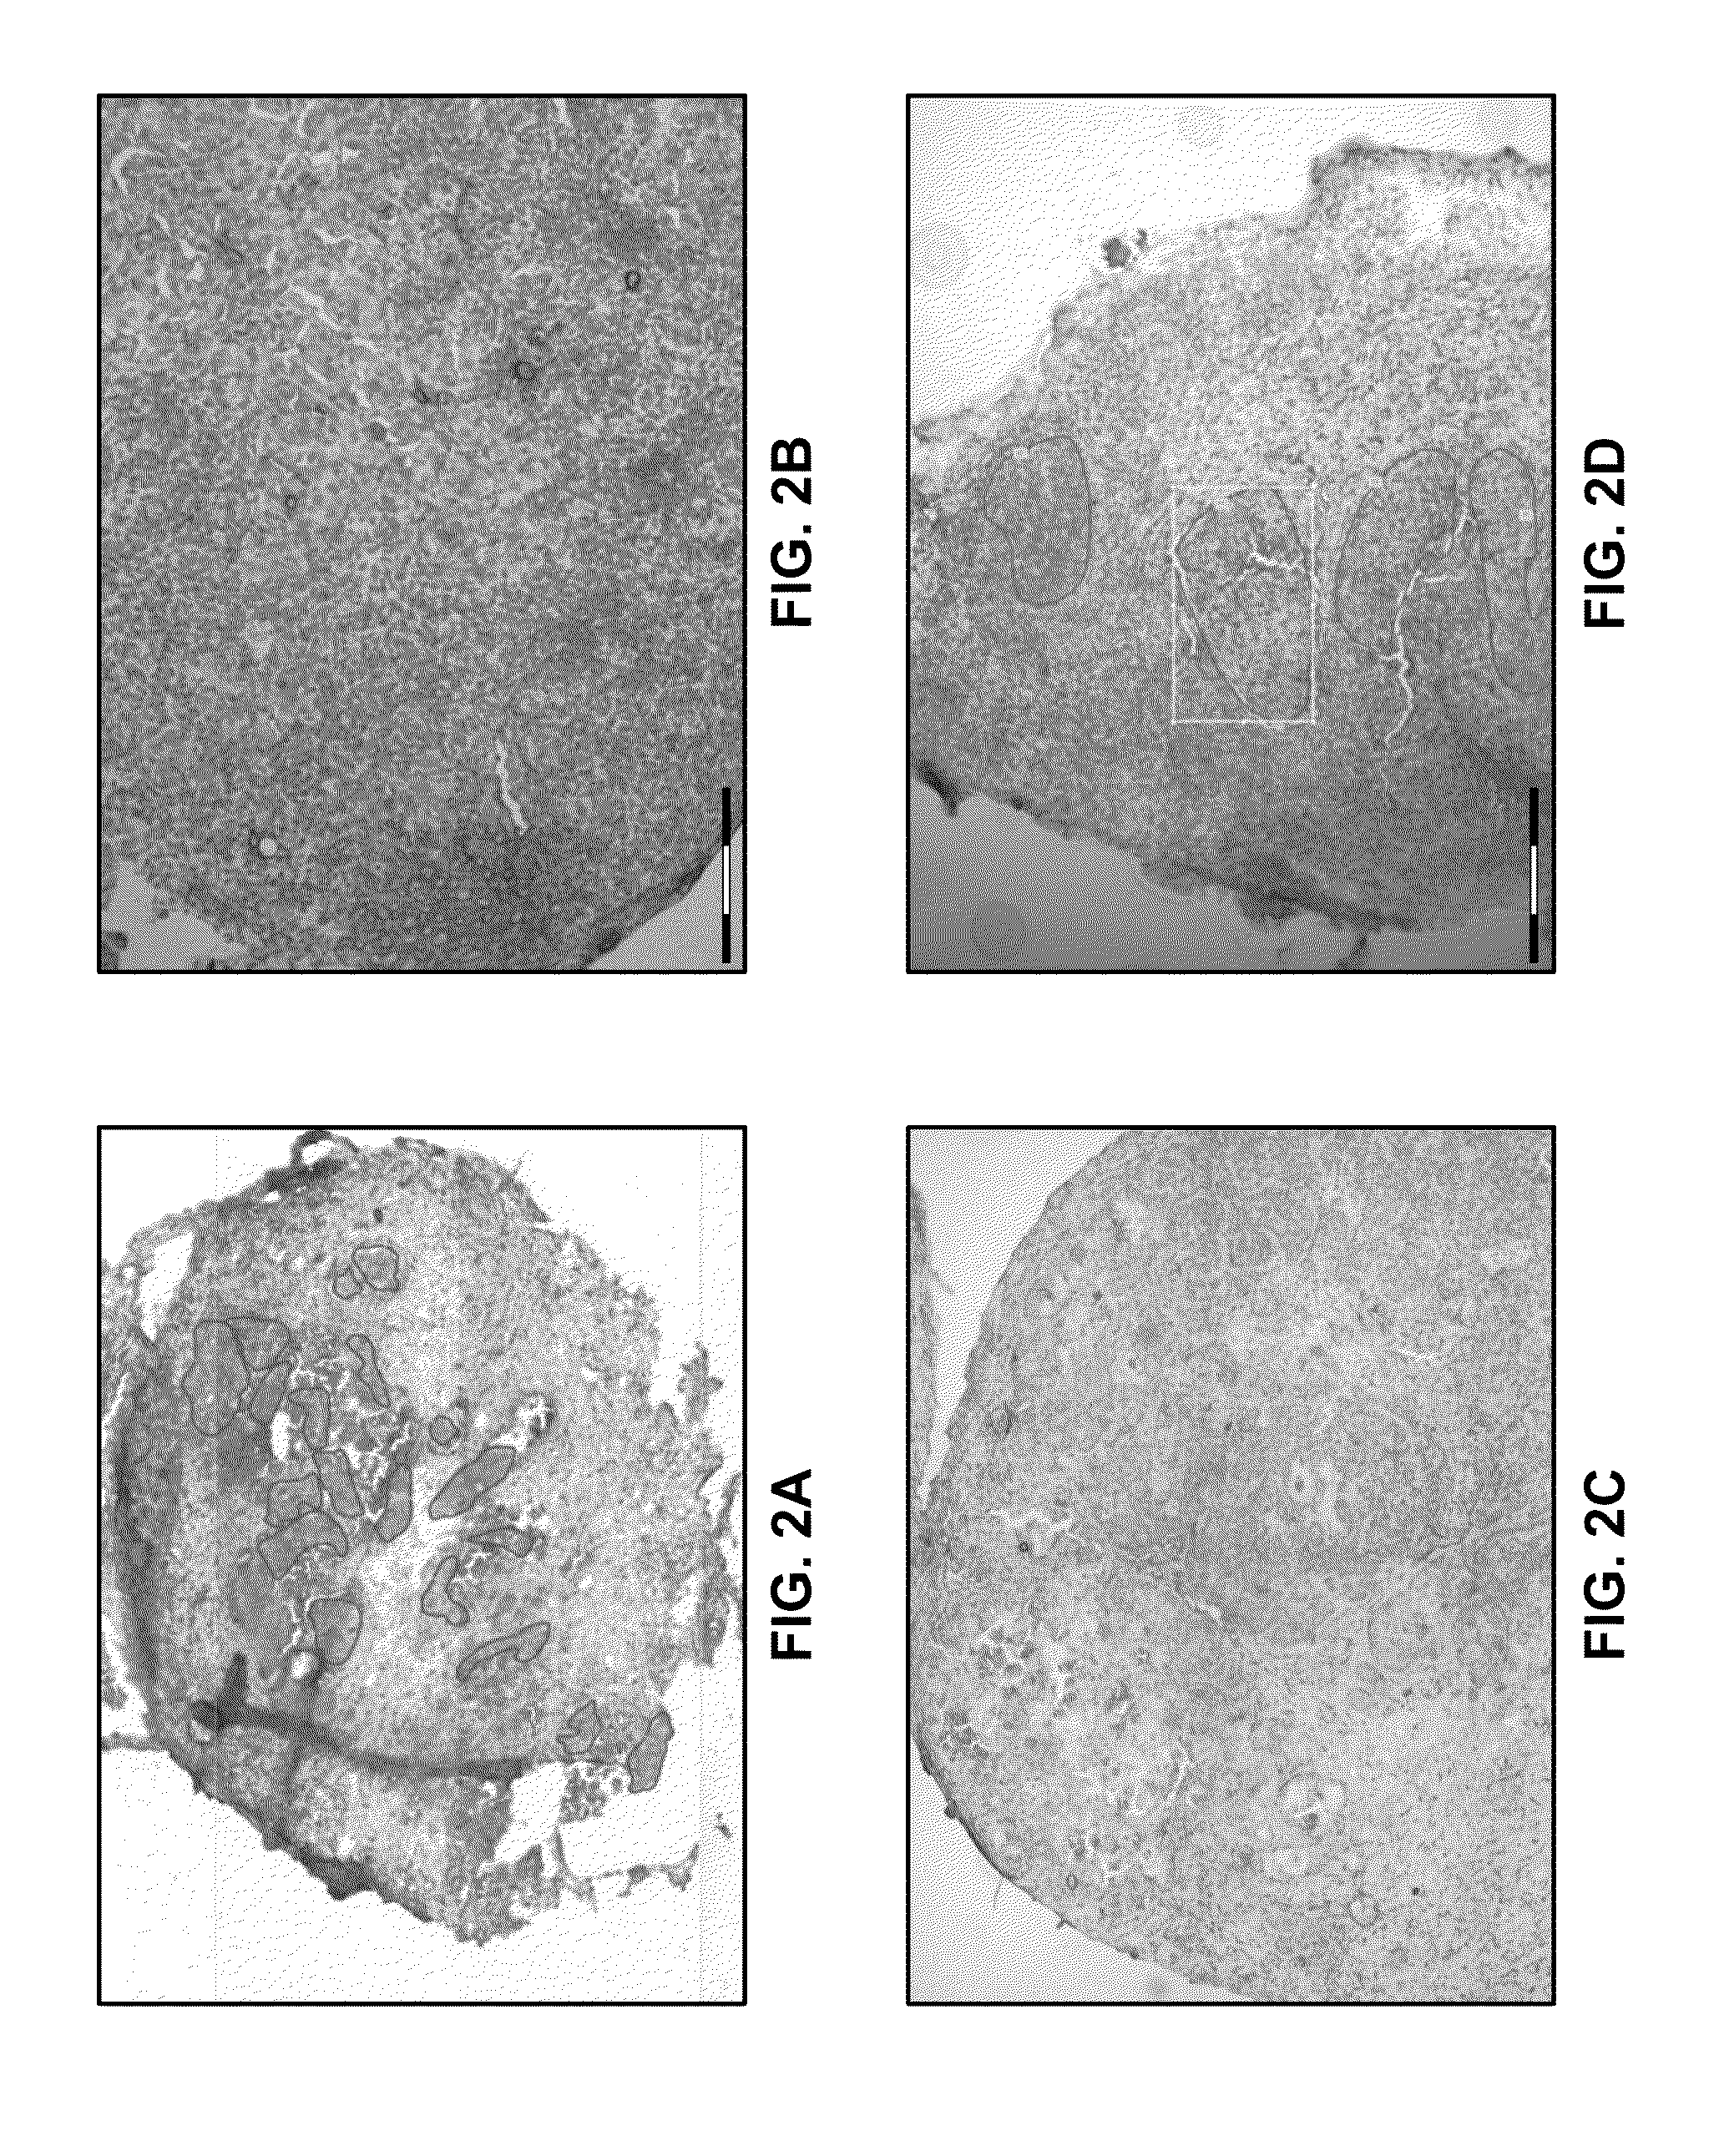 Markers for cancer prognosis and therapy and methods of use